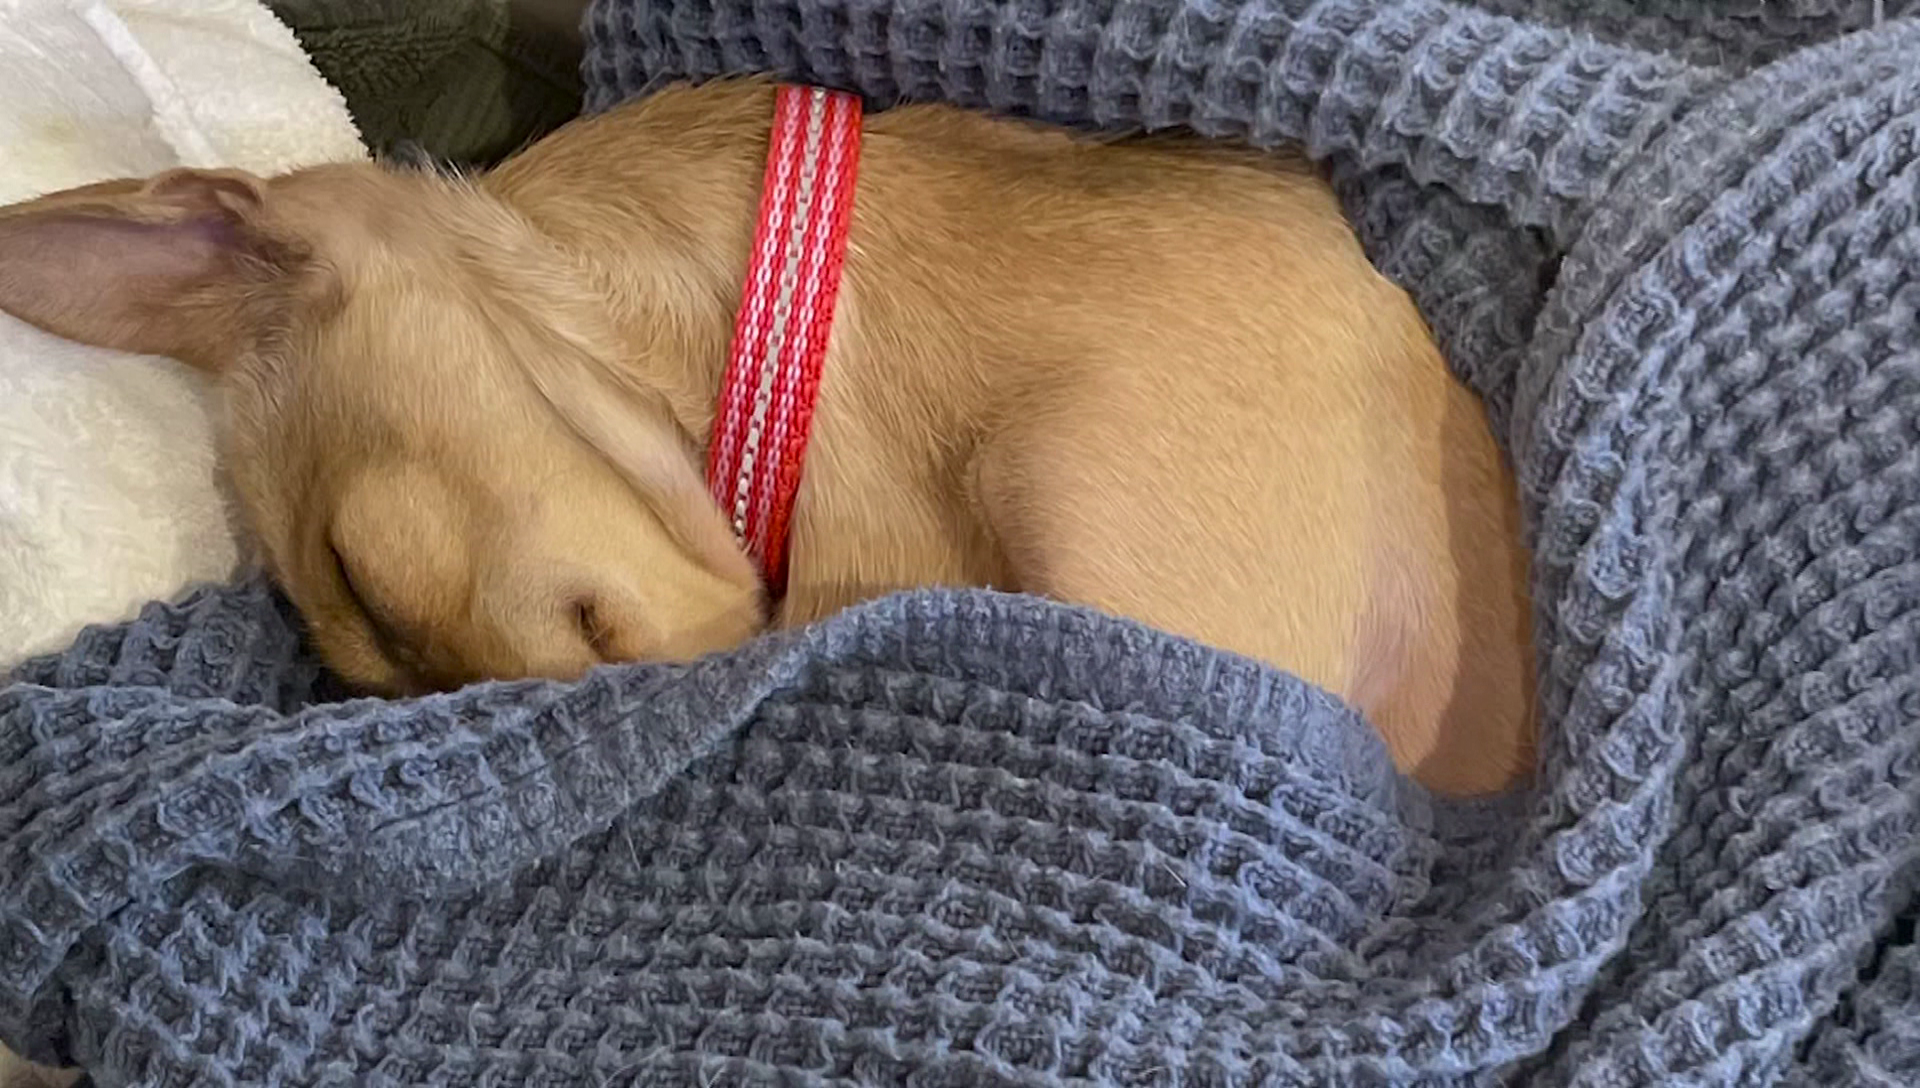 A light brown dog wearing a red collar sleeps curled up in a blue towel